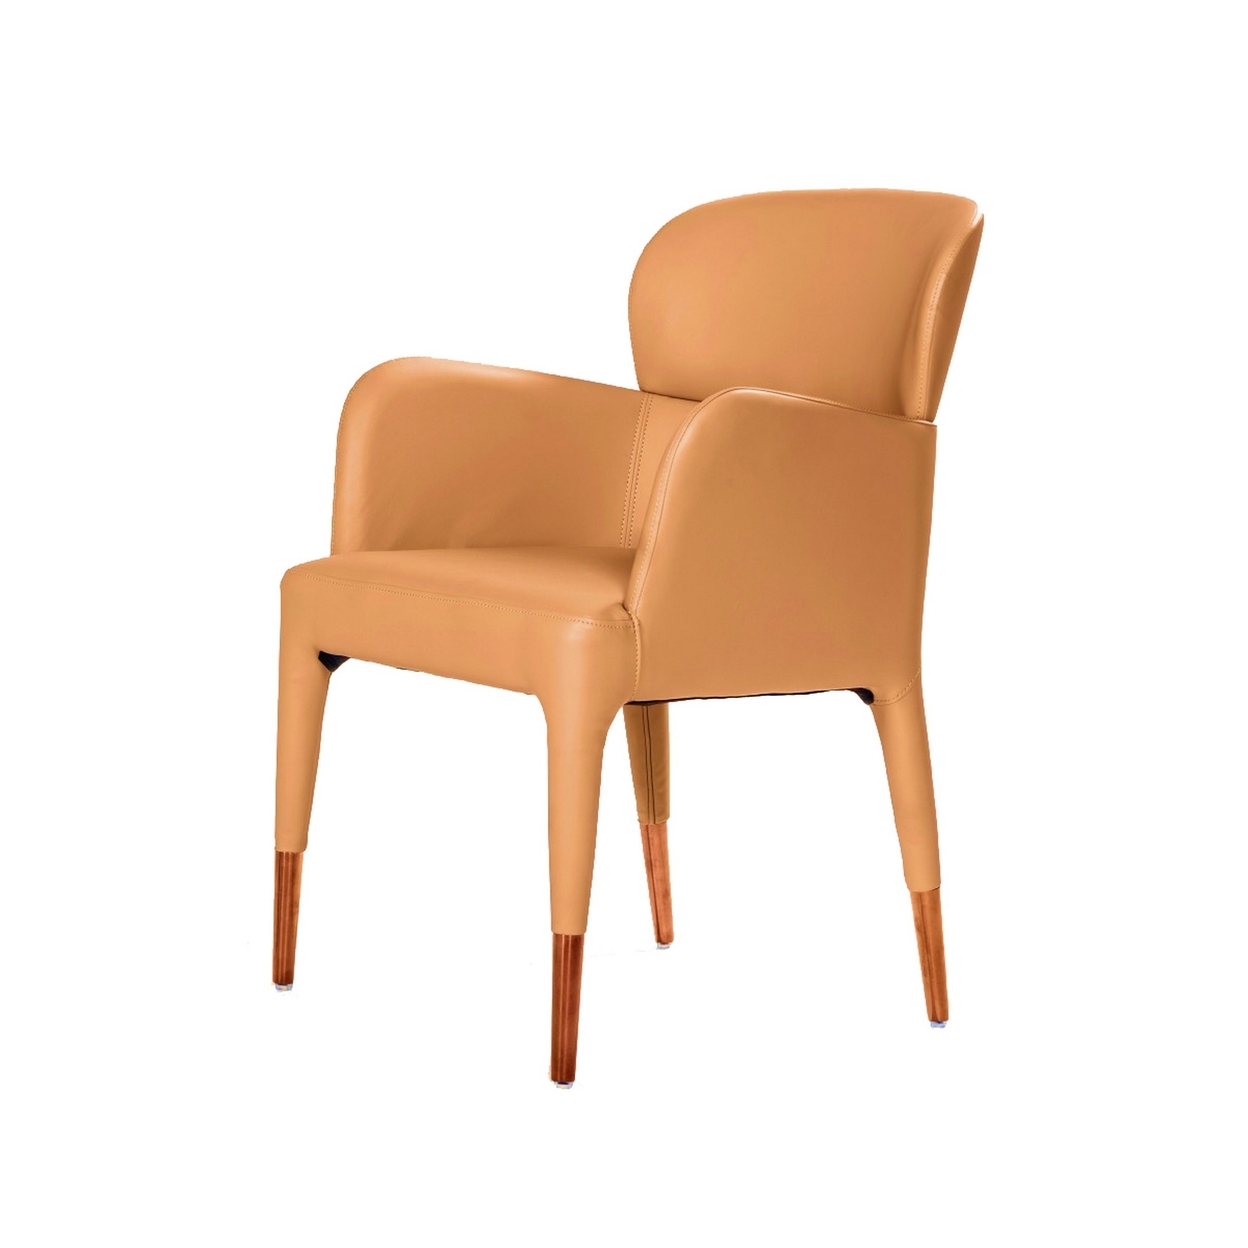 Leatherette Dining Armchair With Tapered Legs And Panel Arms, Orange- Saltoro Sherpi